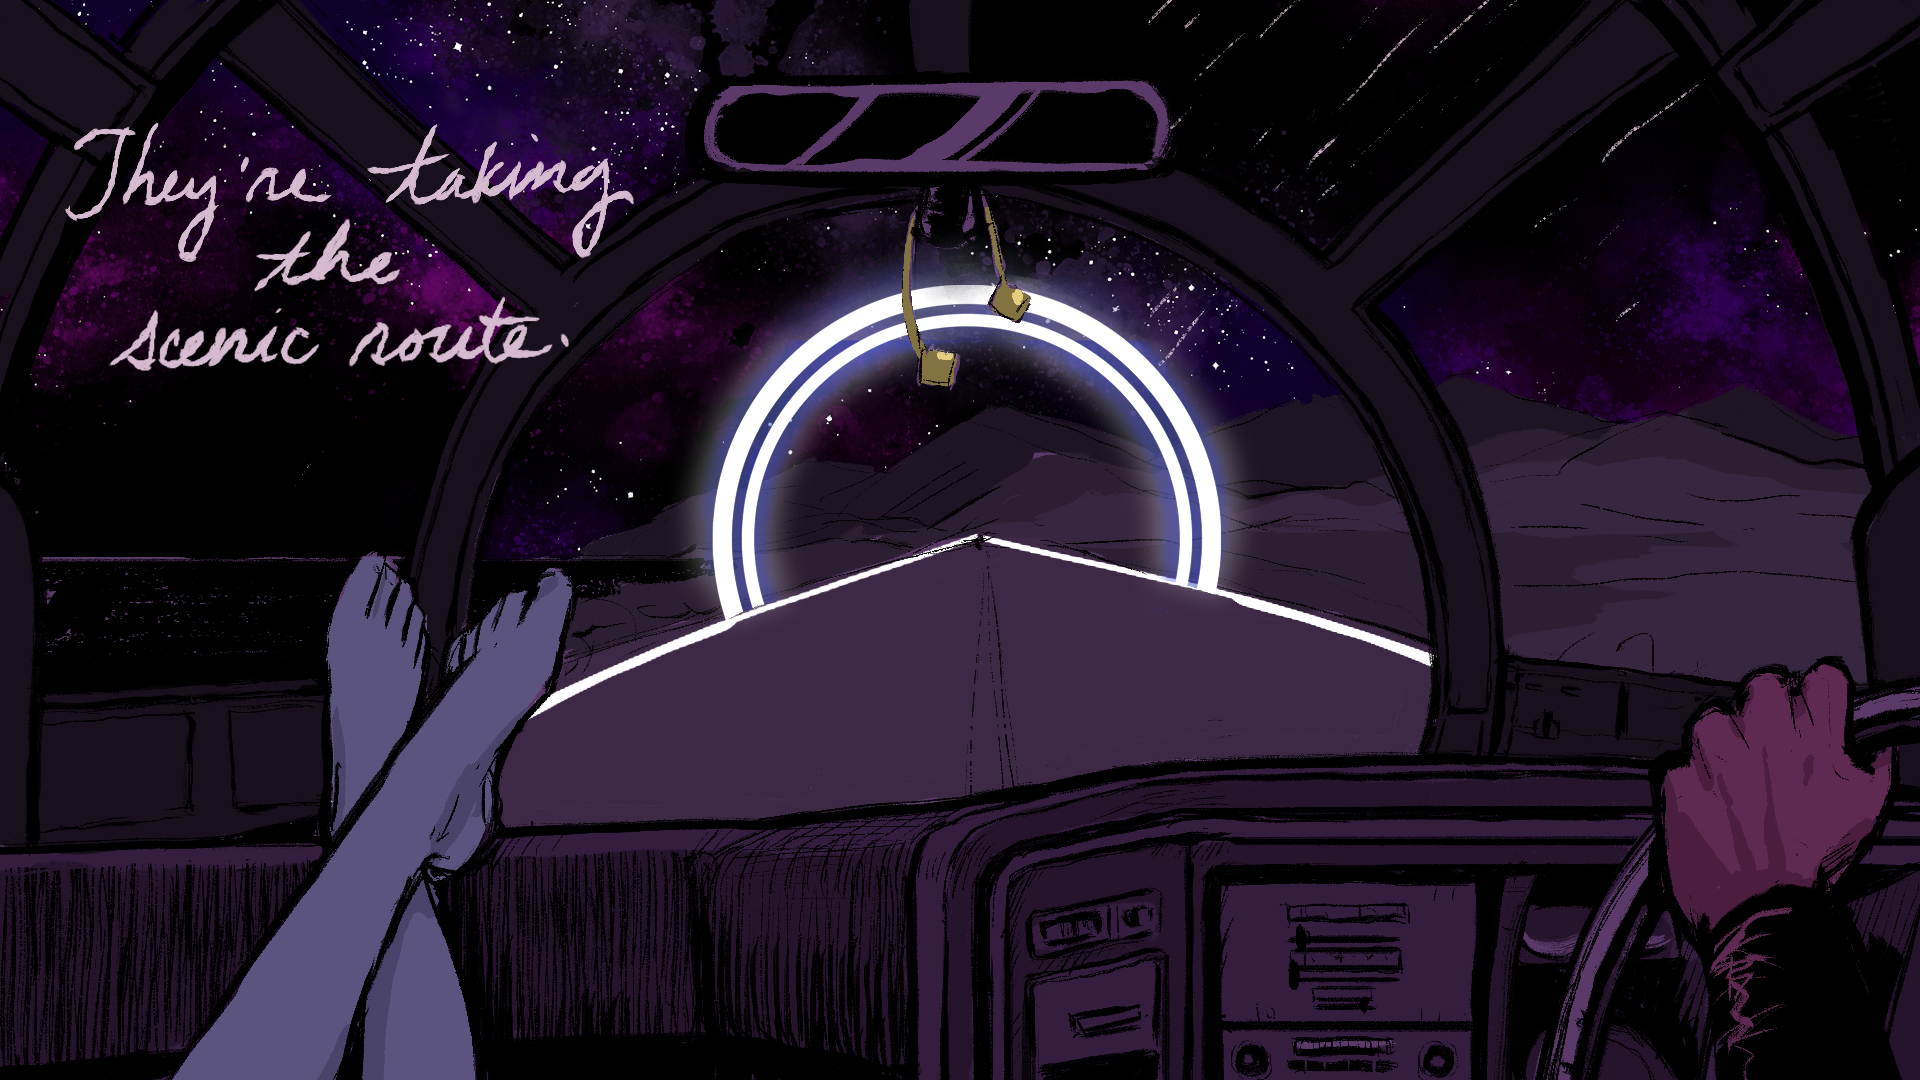 Interior of a right-hand drive vintage car. The windshield is the Millennium Falcon's. Han's dice dangle from the rearview mirror. Rey's feet propped on the dash. Ben's hand on the wheel. Above: a brilliant night sky with shooting stars. To the left, a black sea. To the right, distant mountains. Straight ahead: the road, limned with light, and a glowing circular gate from the World Between Worlds.